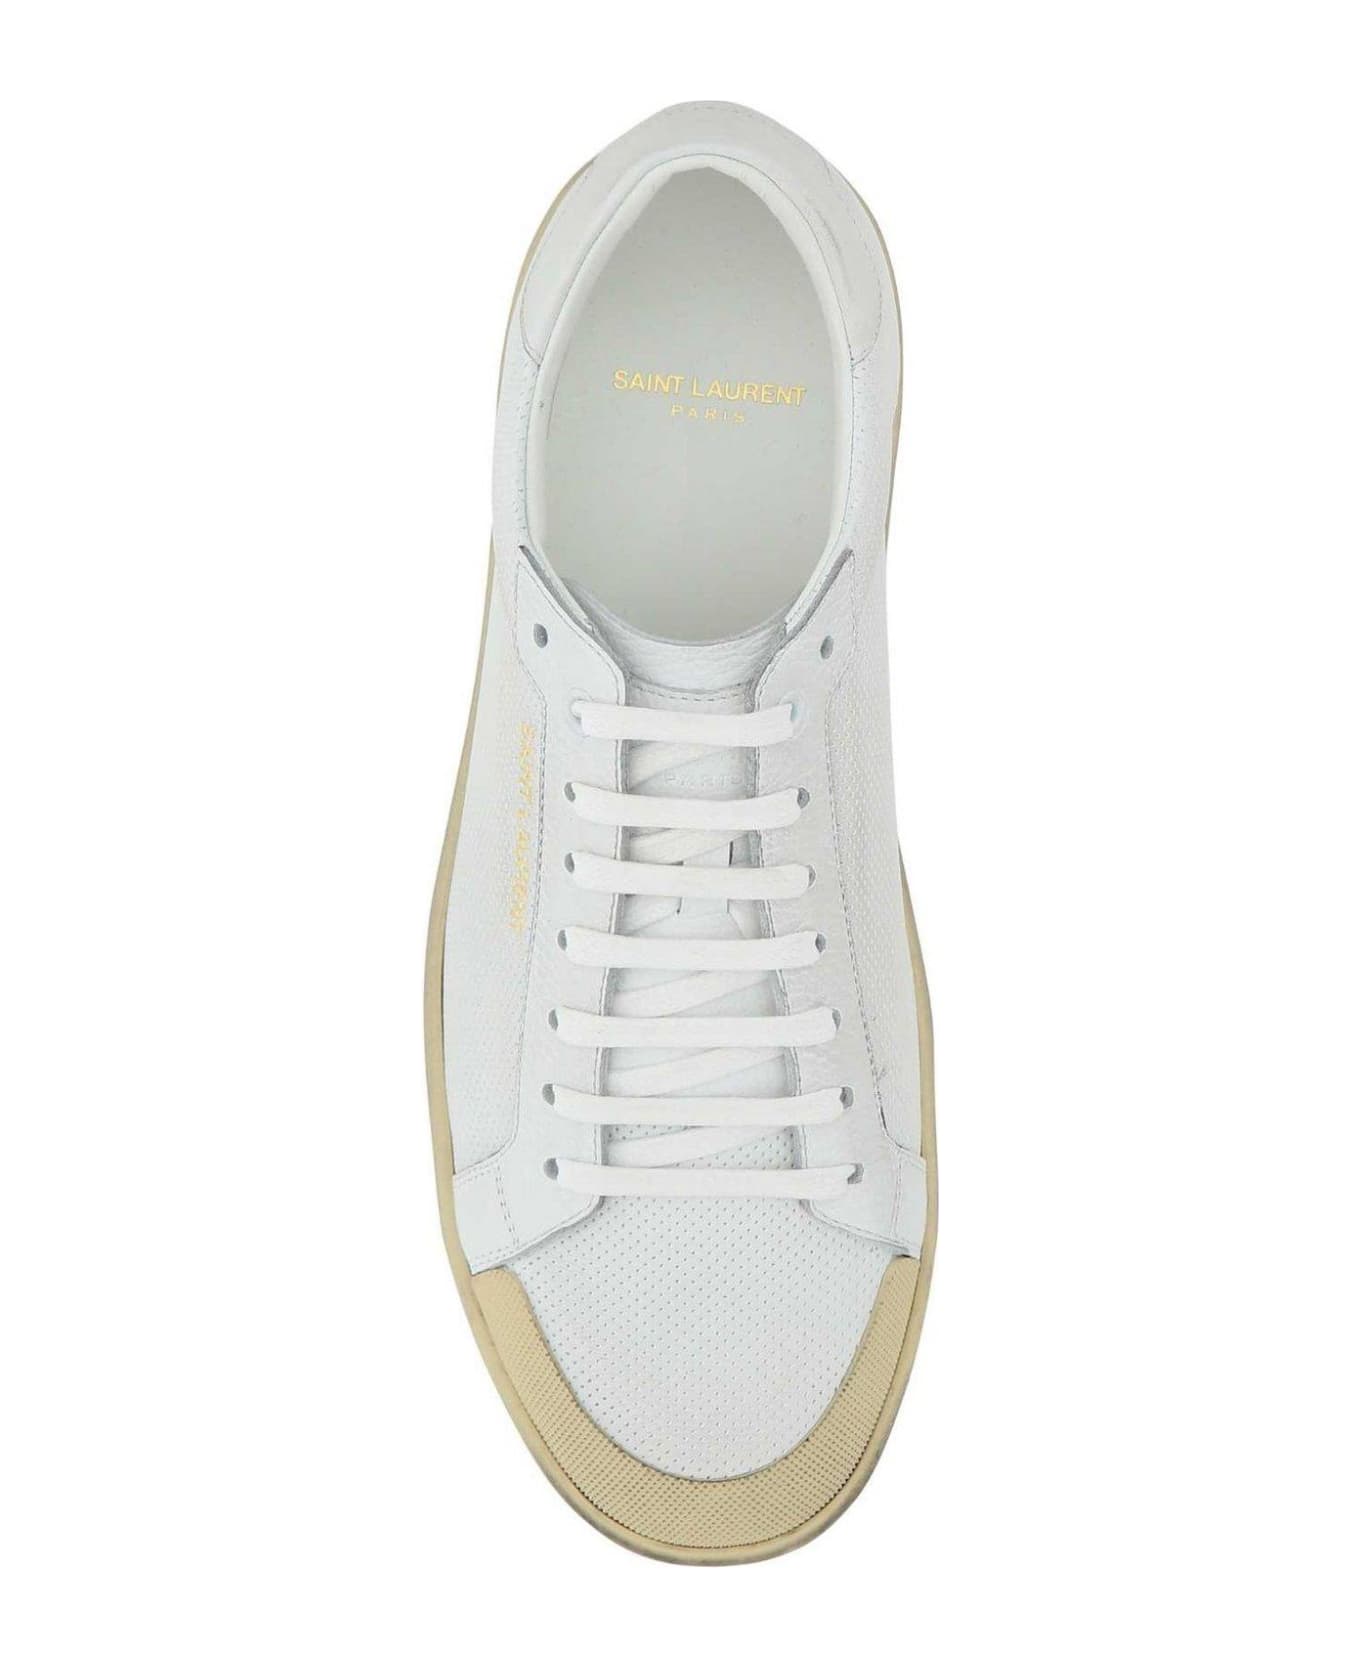 Saint Laurent Round Toe Lace-up Sneakers - Bianco スニーカー